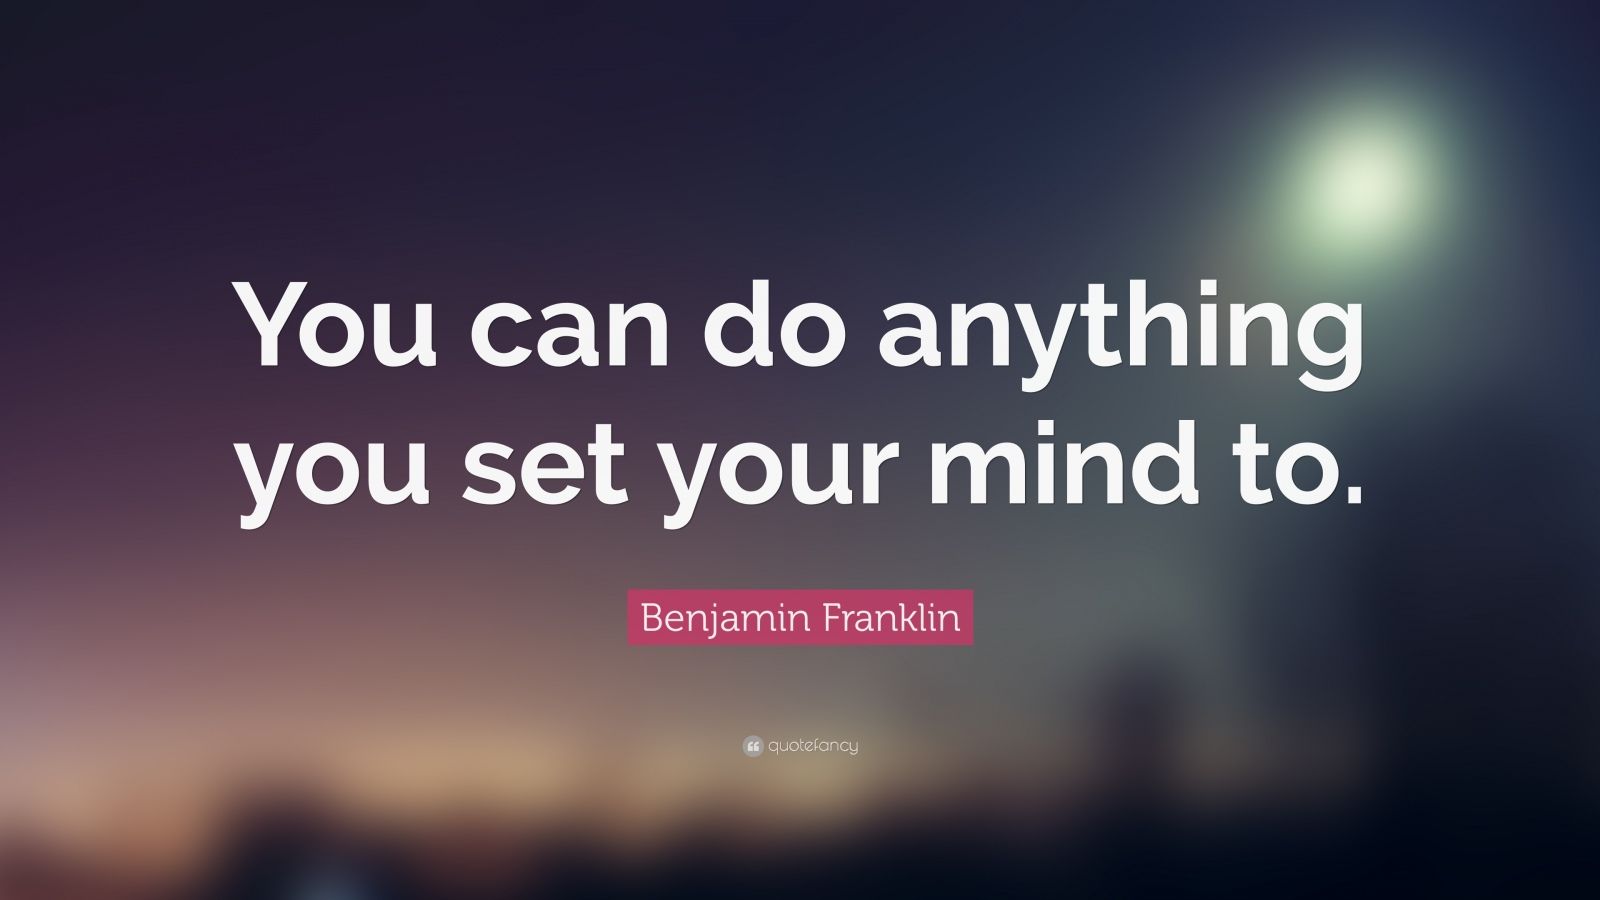 Benjamin Franklin Quote: “You can do anything you set your mind to